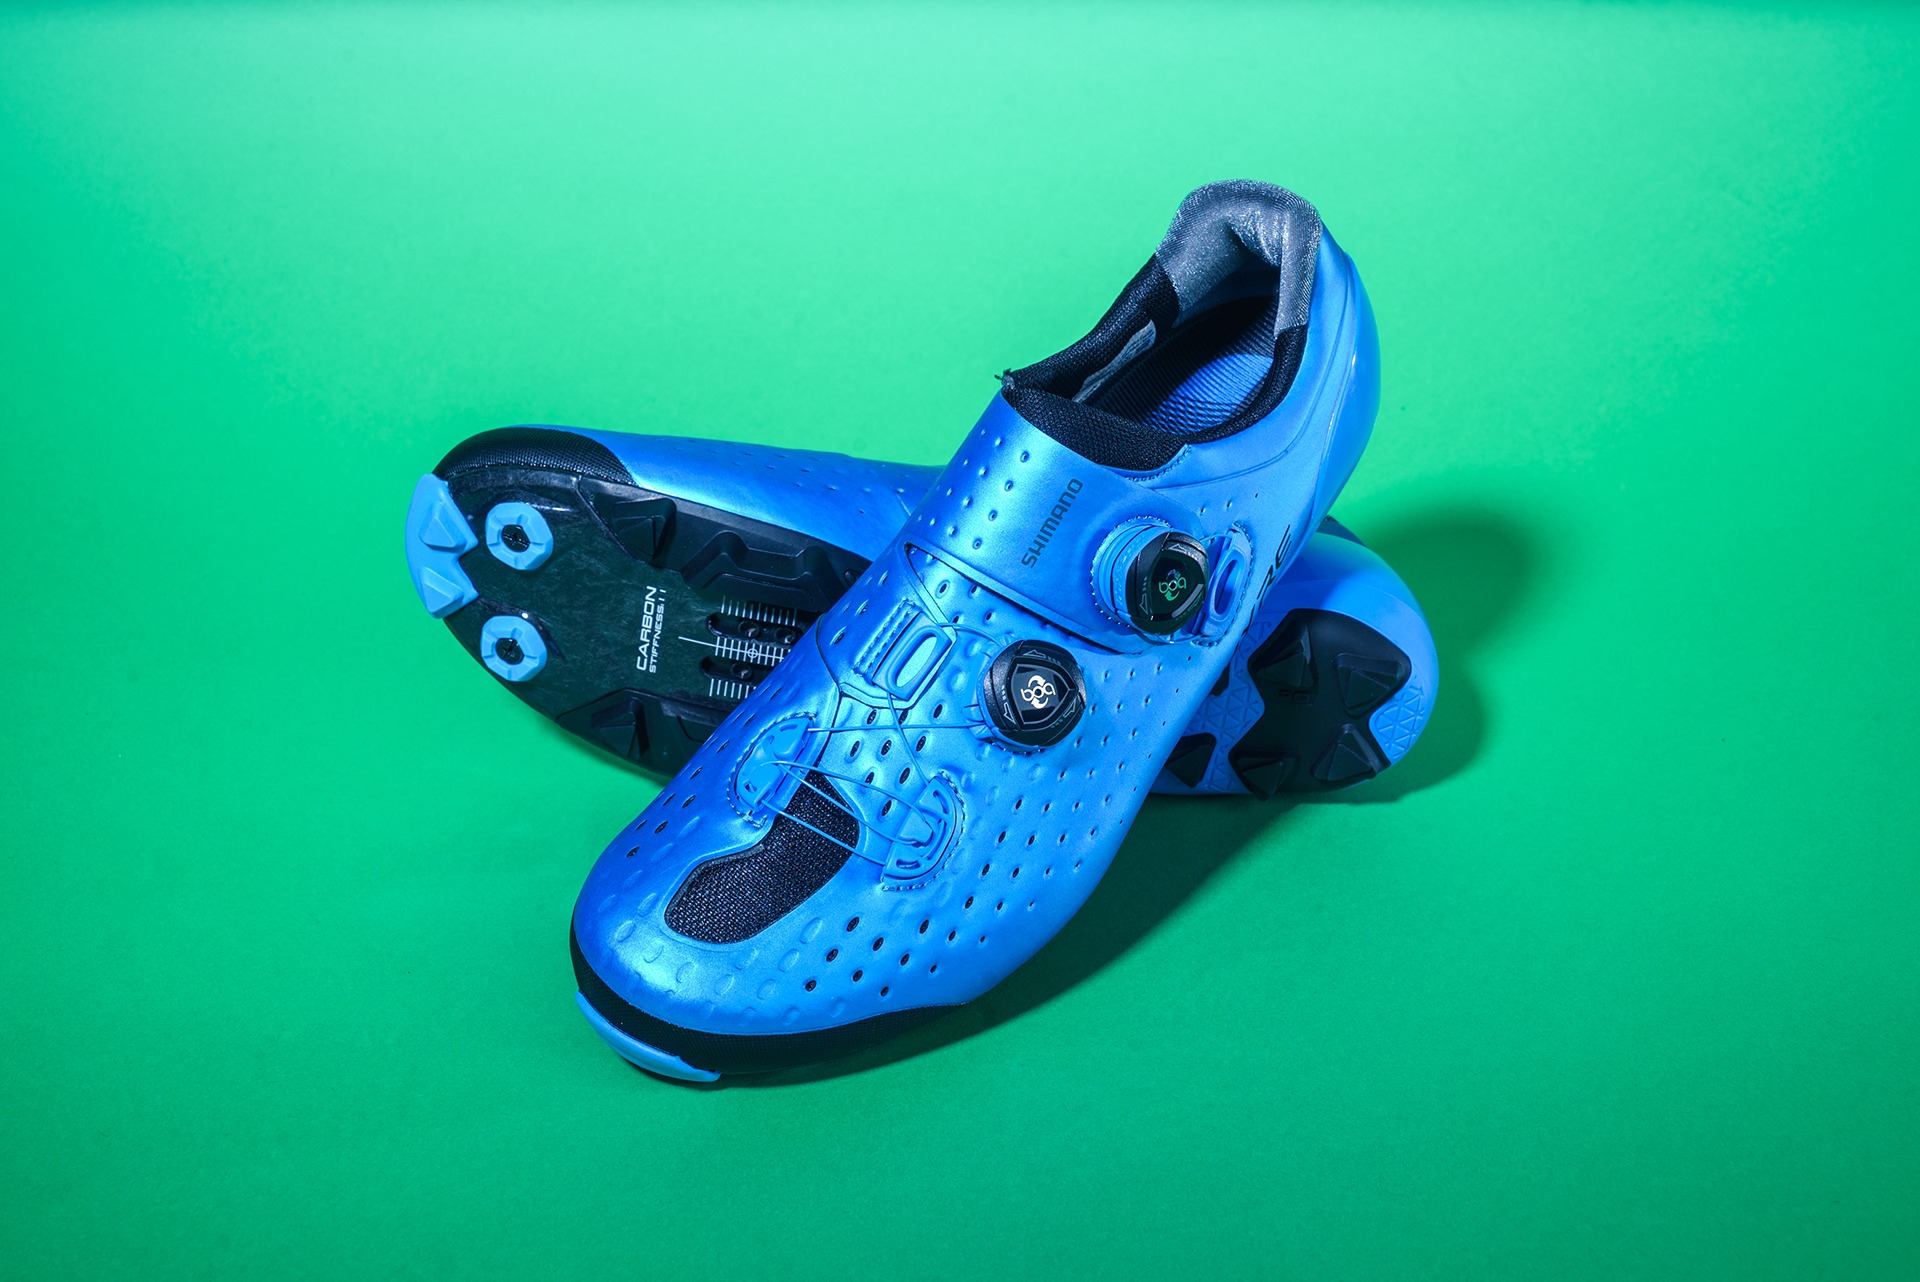 SHIMANO – S-PHYRE XC9 – REVIEW